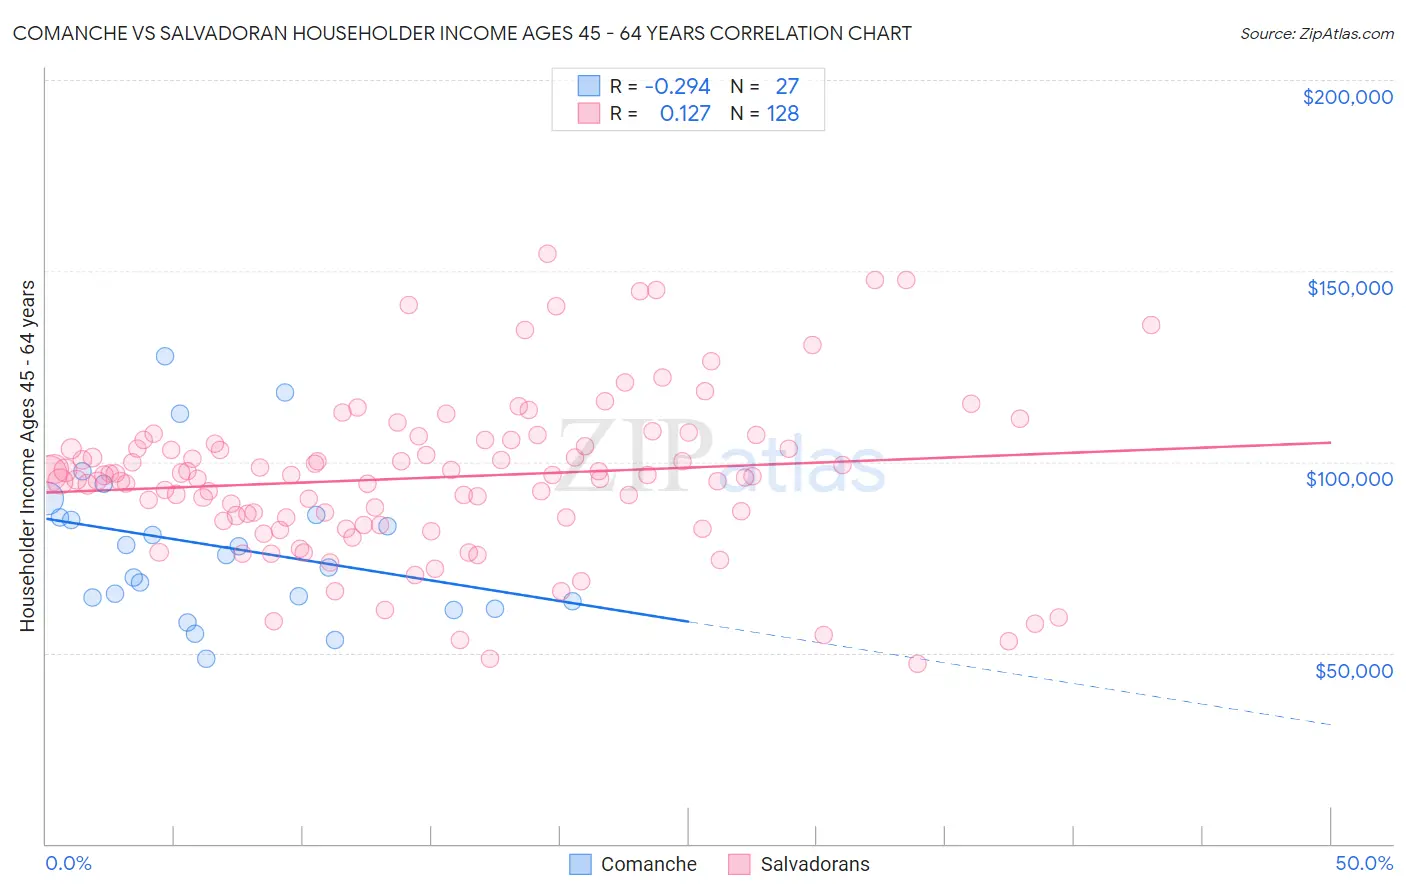 Comanche vs Salvadoran Householder Income Ages 45 - 64 years